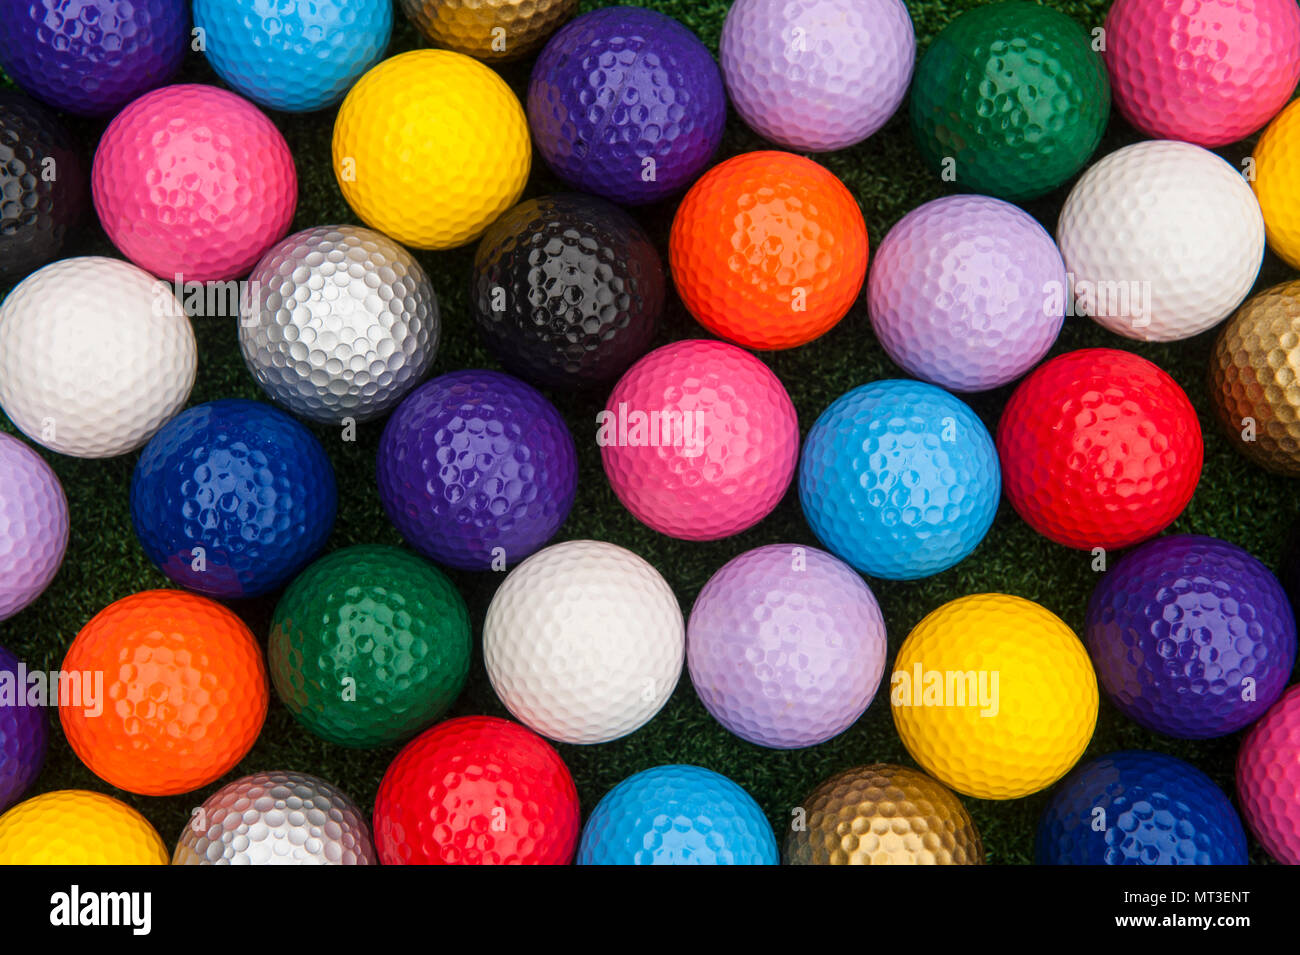 Variety of colorful balls for putt putt or mini golf Stock Photo